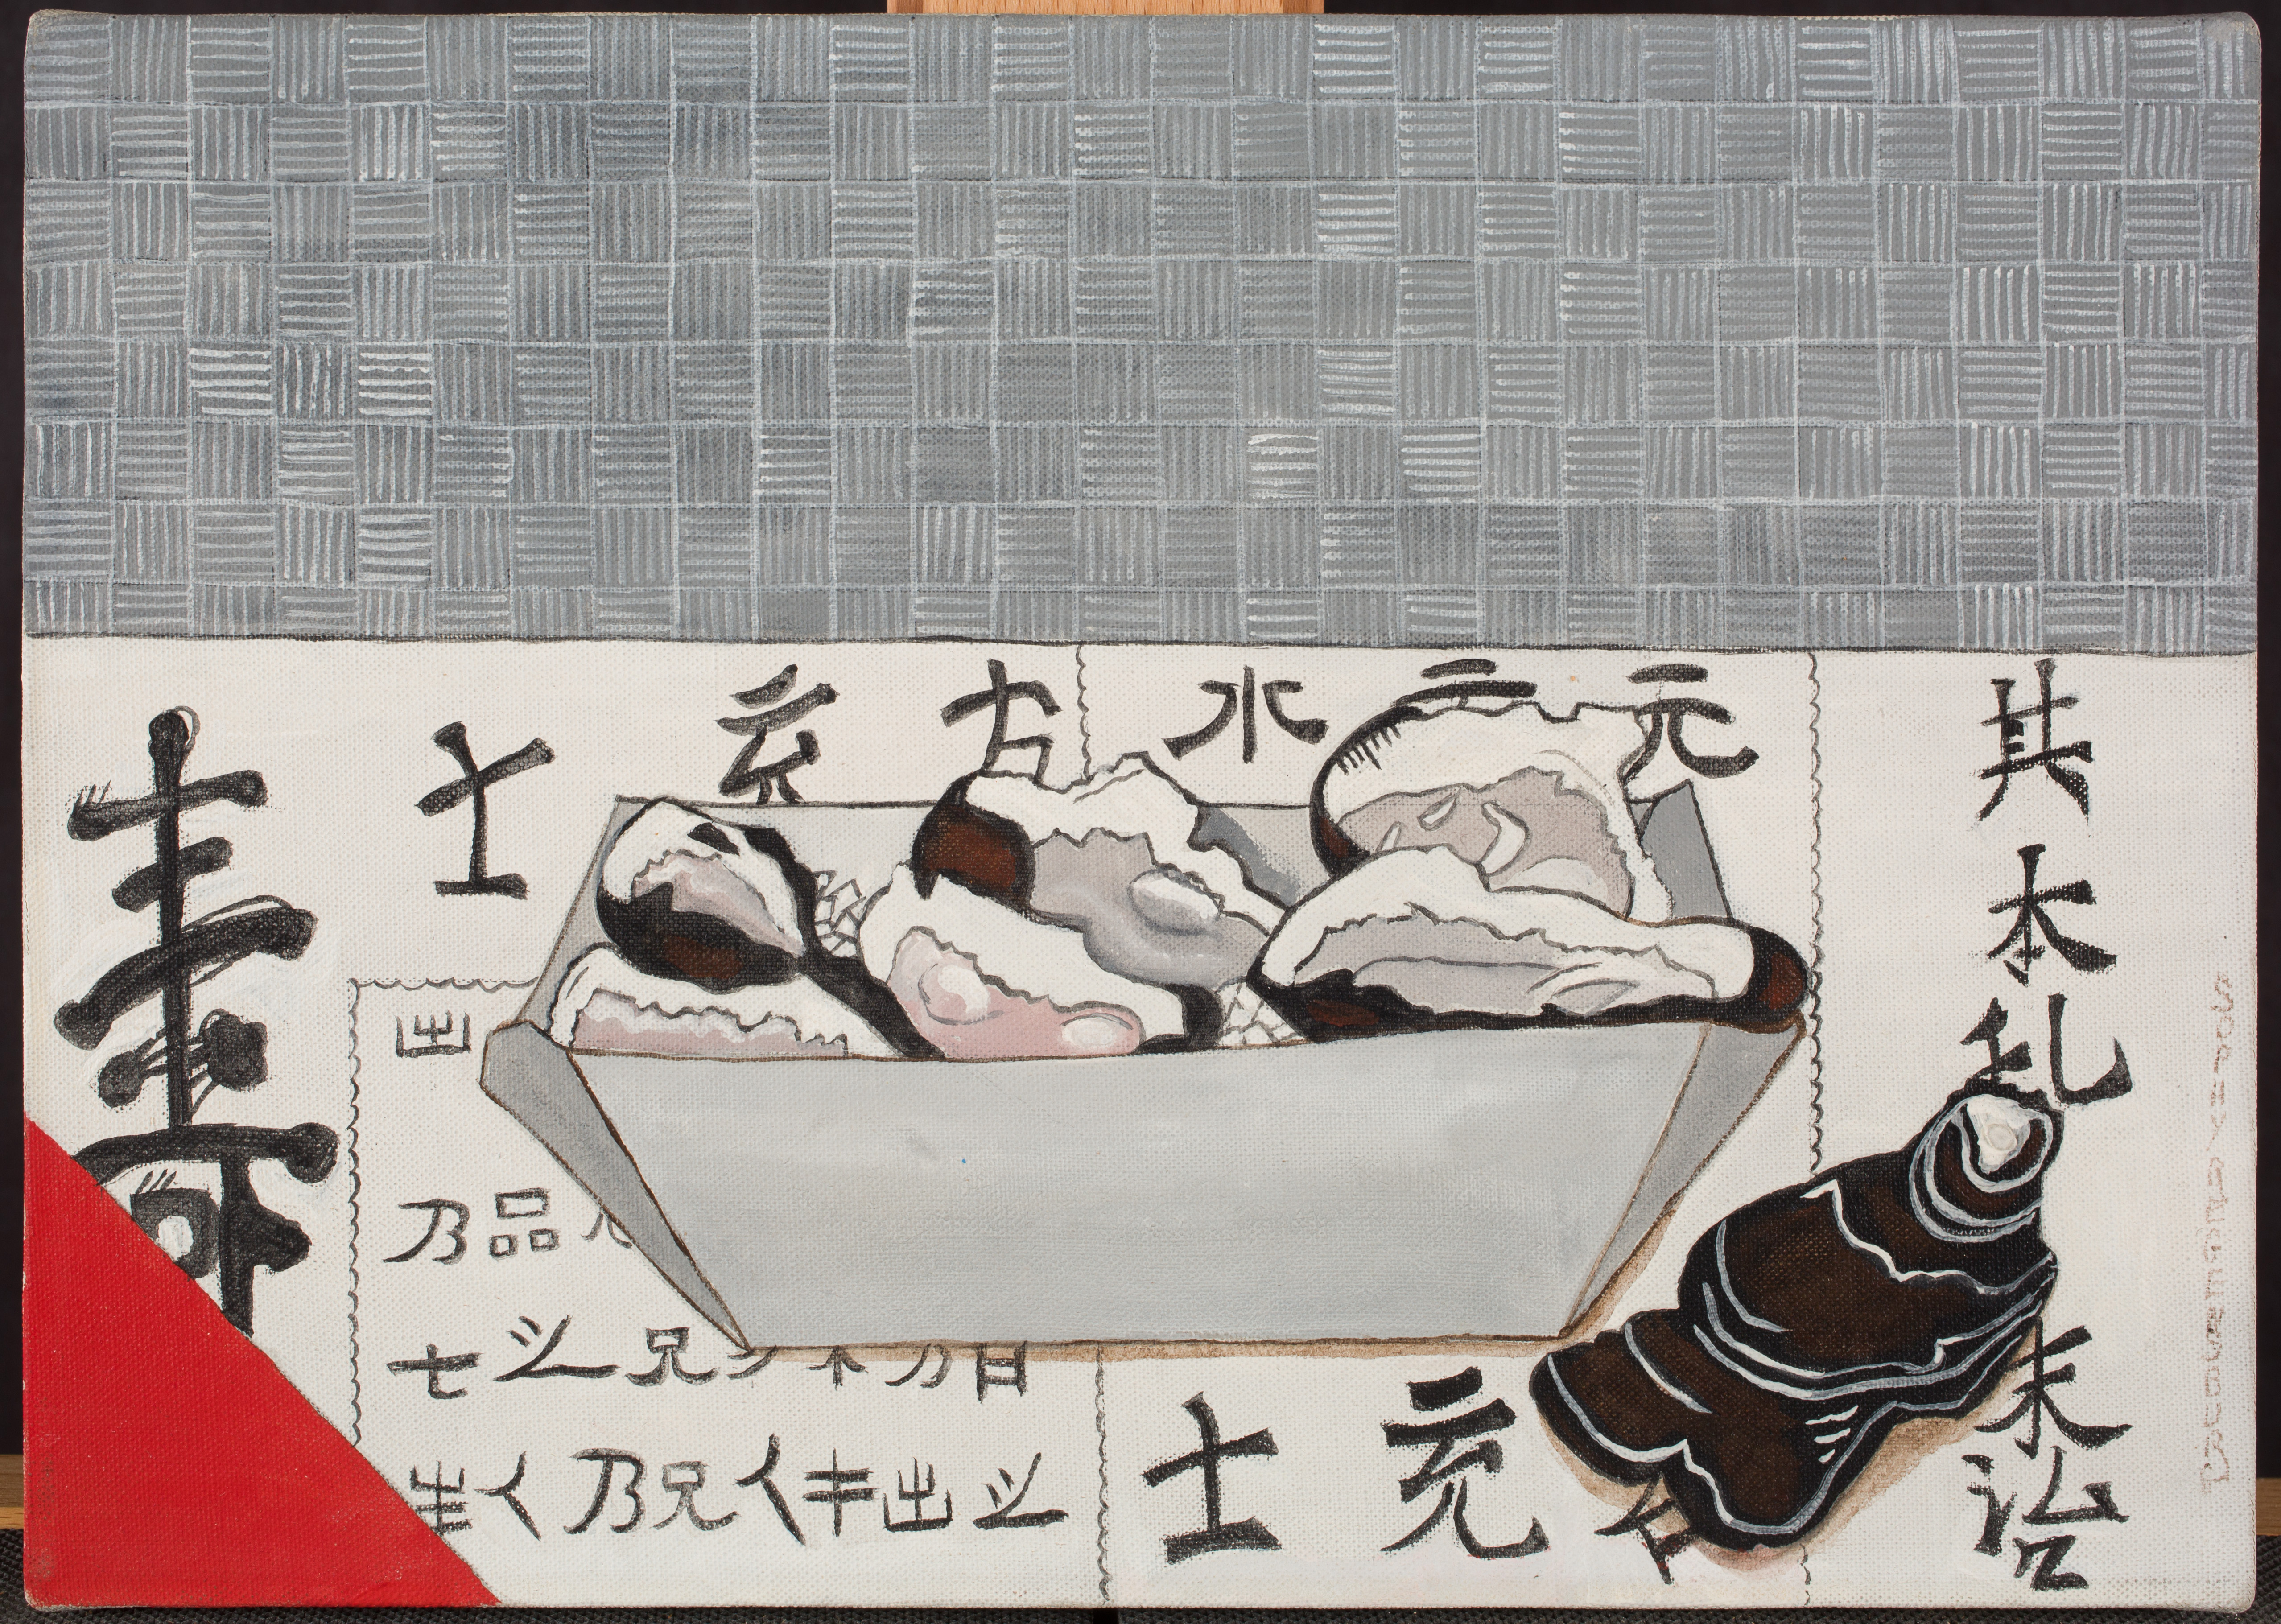 <b>Sophy Regensburg </b>(1885-1974)<br><i>Oysters with Chinese Calligraphy</i>, undated<br>
Casein on canvas<br>
10 1/8 x 14 1/8 inches<br>
Tufts University Permanent Collection: Gift of Mary Regensburg Feist
